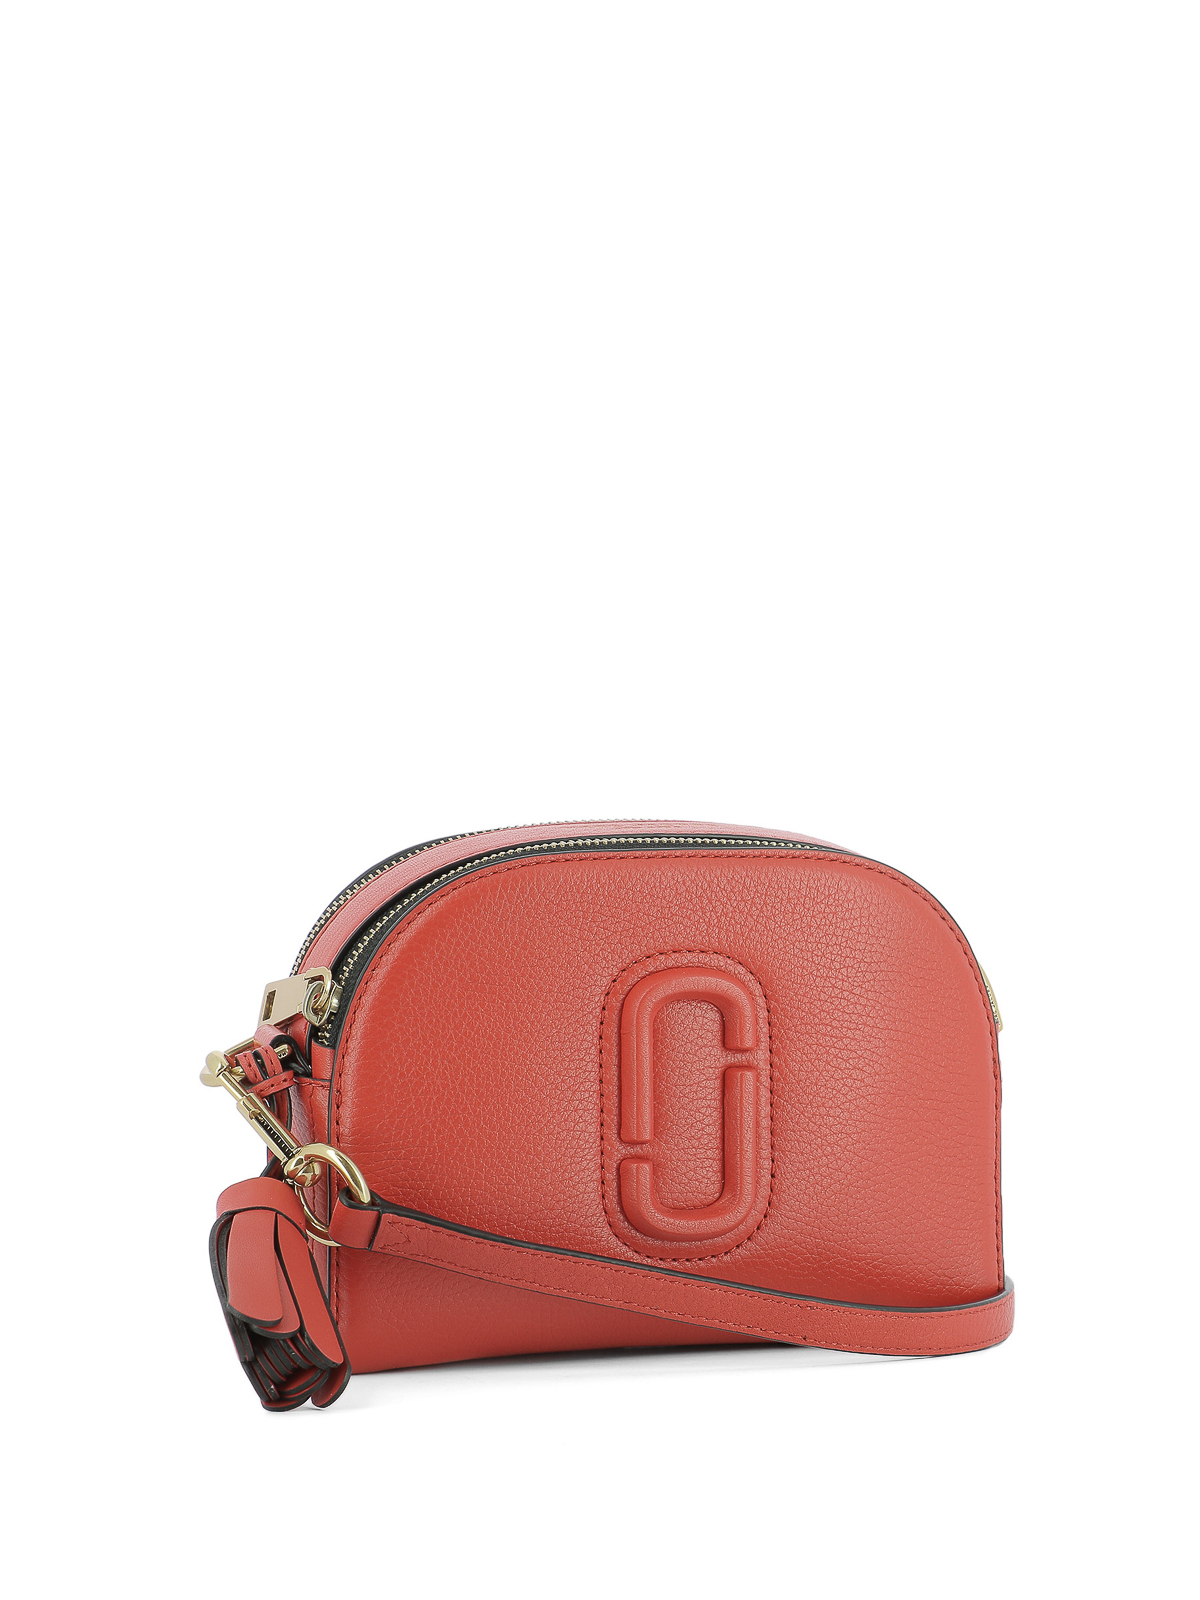 MARC JACOBS Shutter Leather Crossbody